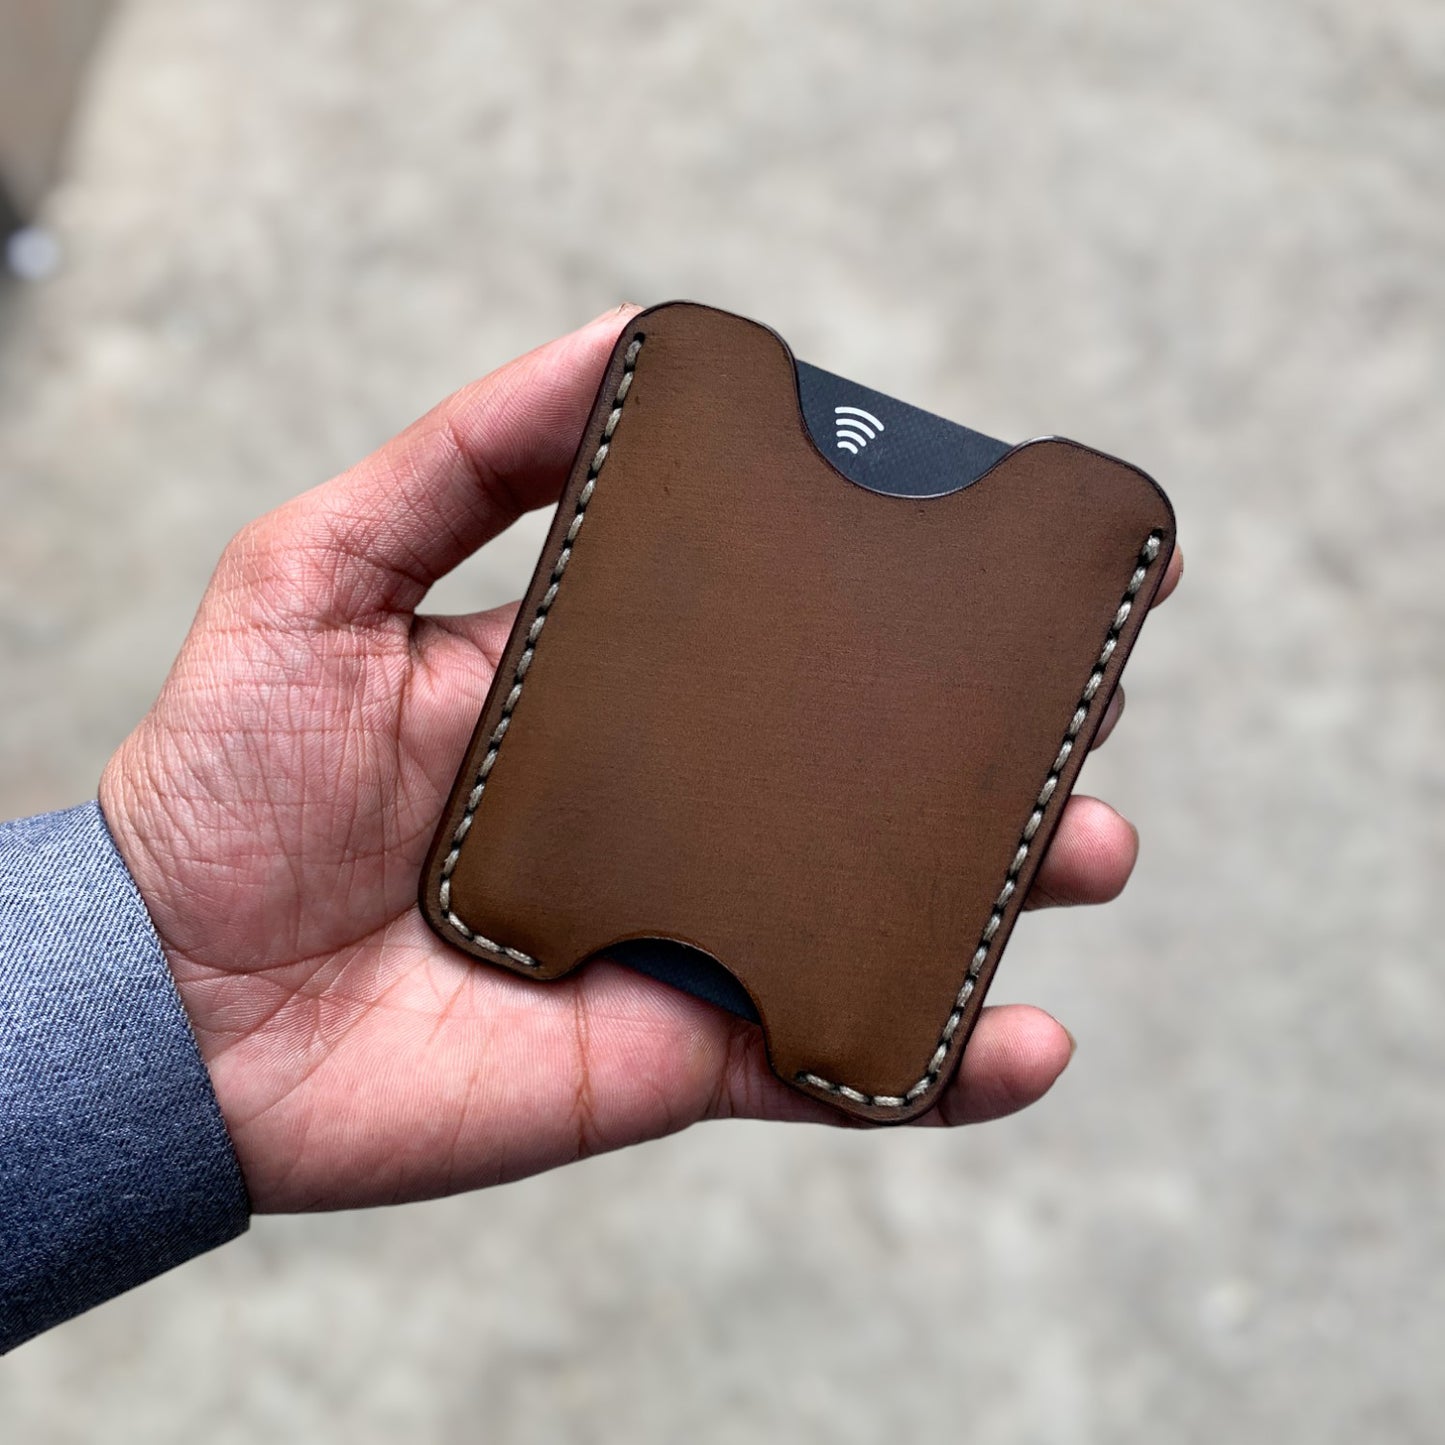 The Oval: A Leather Cardholder